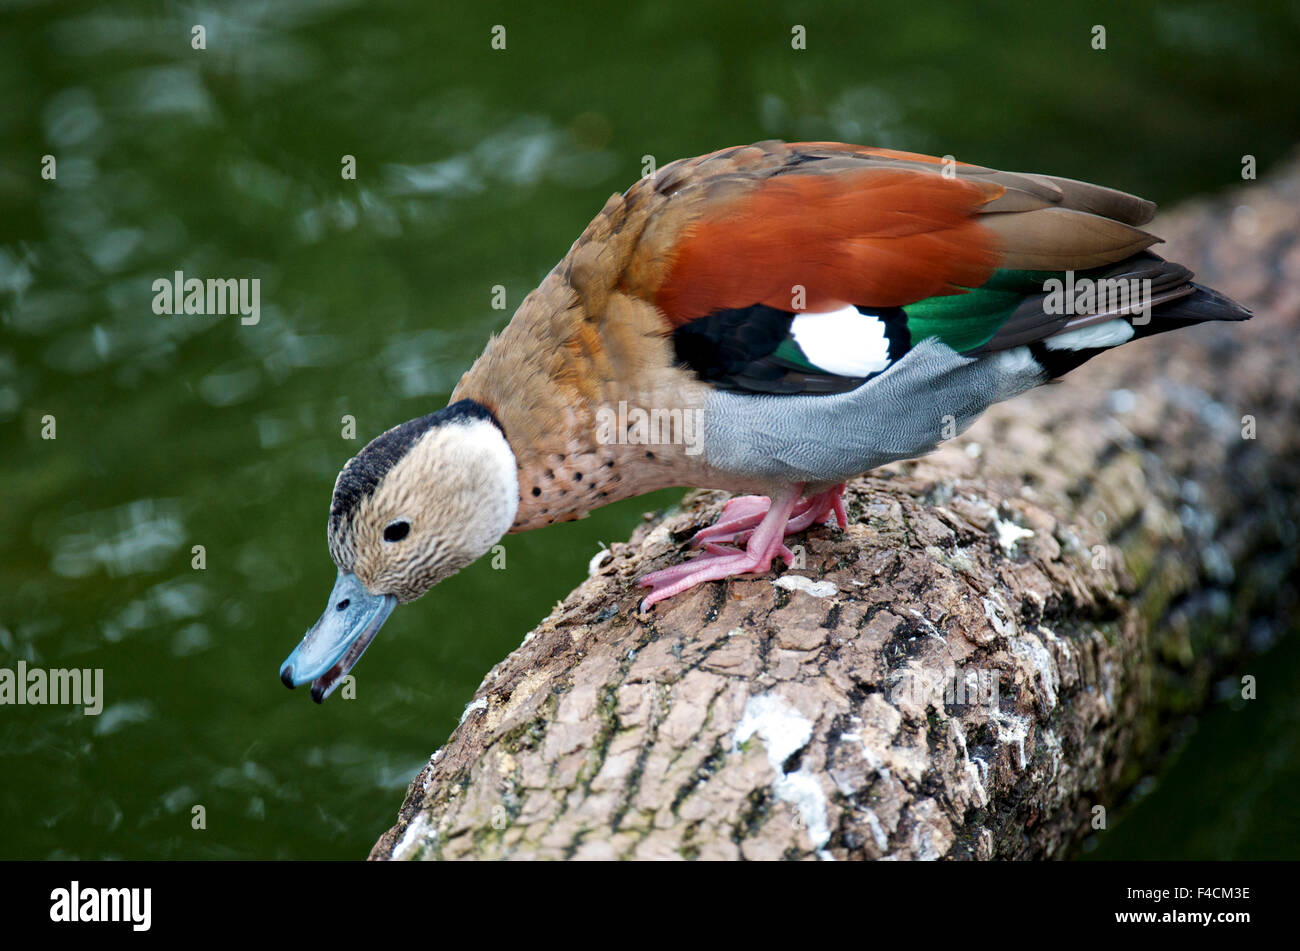 A Blue-billed duck in Kowloon Park. The Ringed Teal (Callonetta Leucophrys) is a small duck of South American forests. It is the only species of the genus Callonetta. It is captive in Kowloon Park, Hong Kong Stock Photo